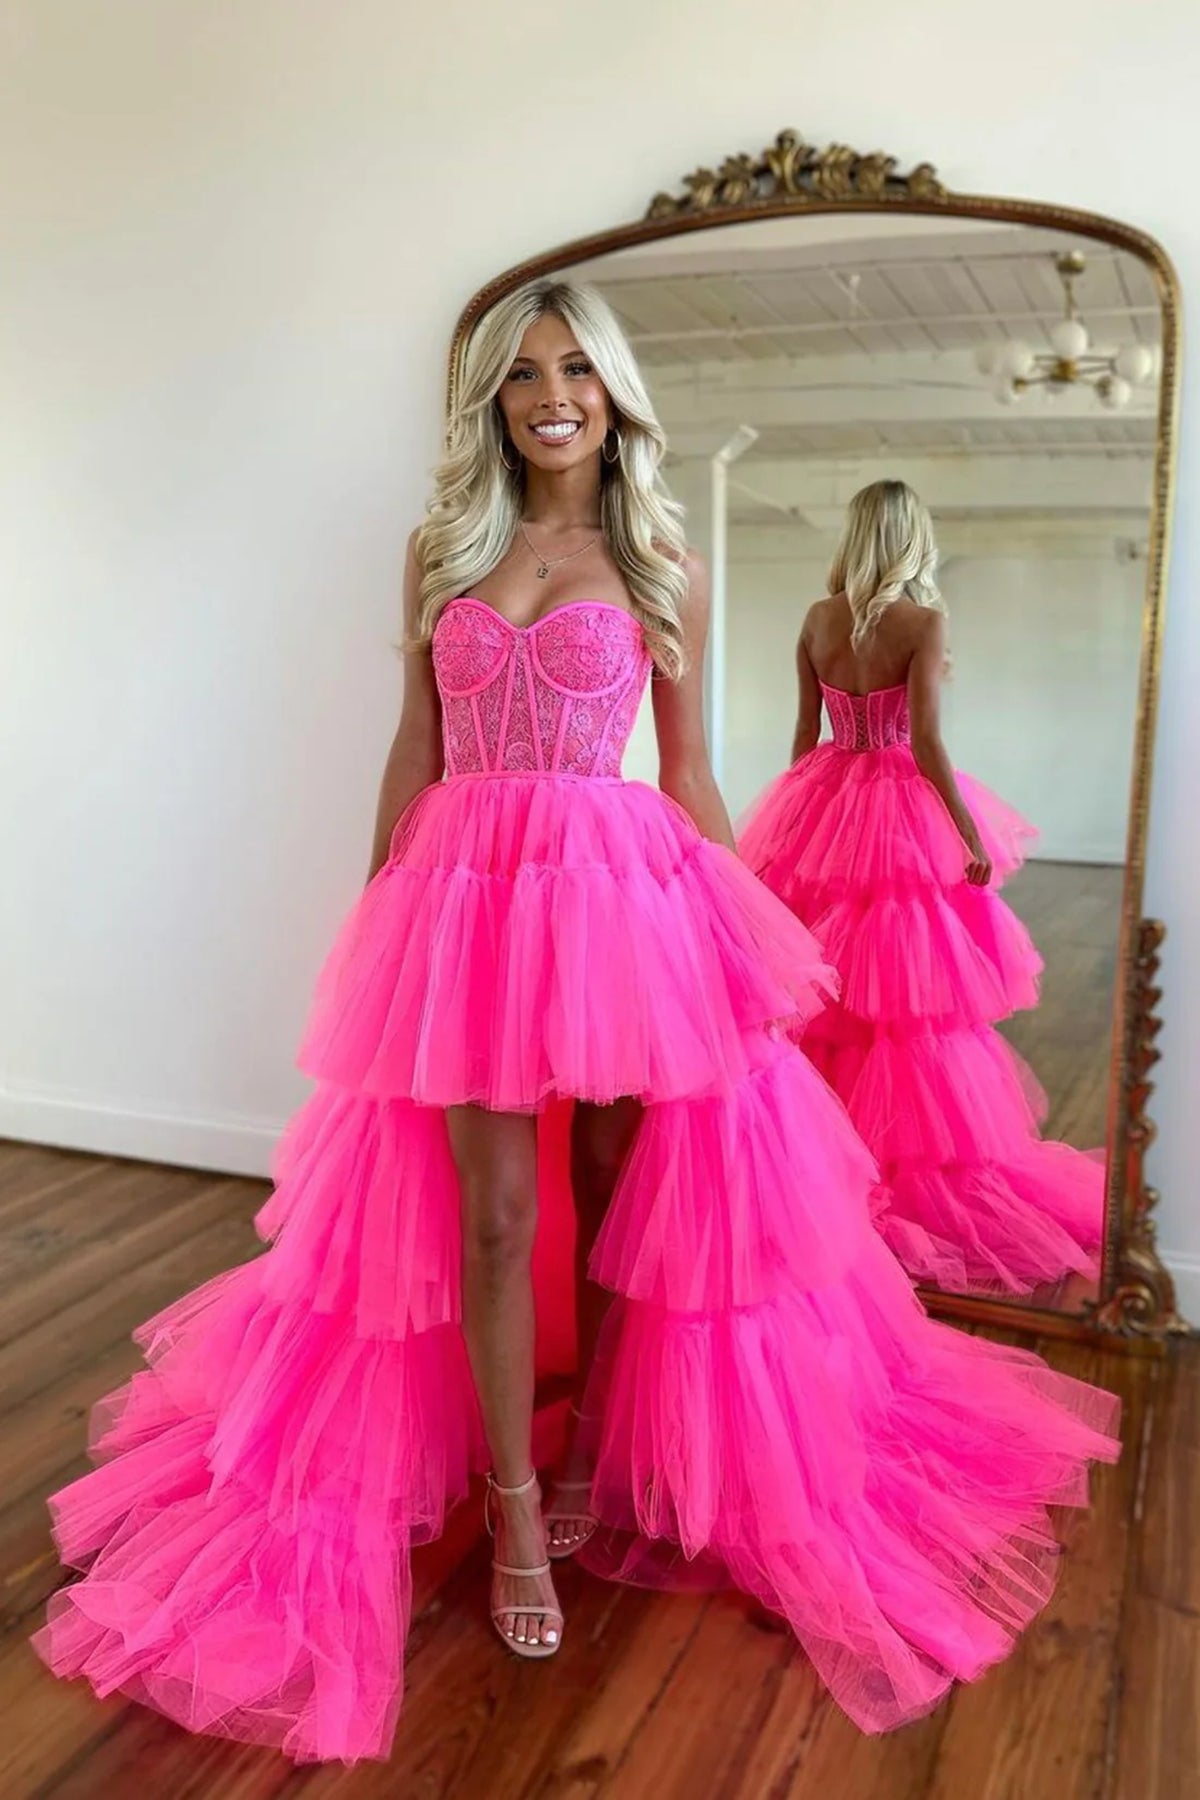 Sweetheart Neck High Low Hot Pink Tulle Lace Prom Dresses, Hot Pink High Low Tulle Lace Formal Evening Dresses